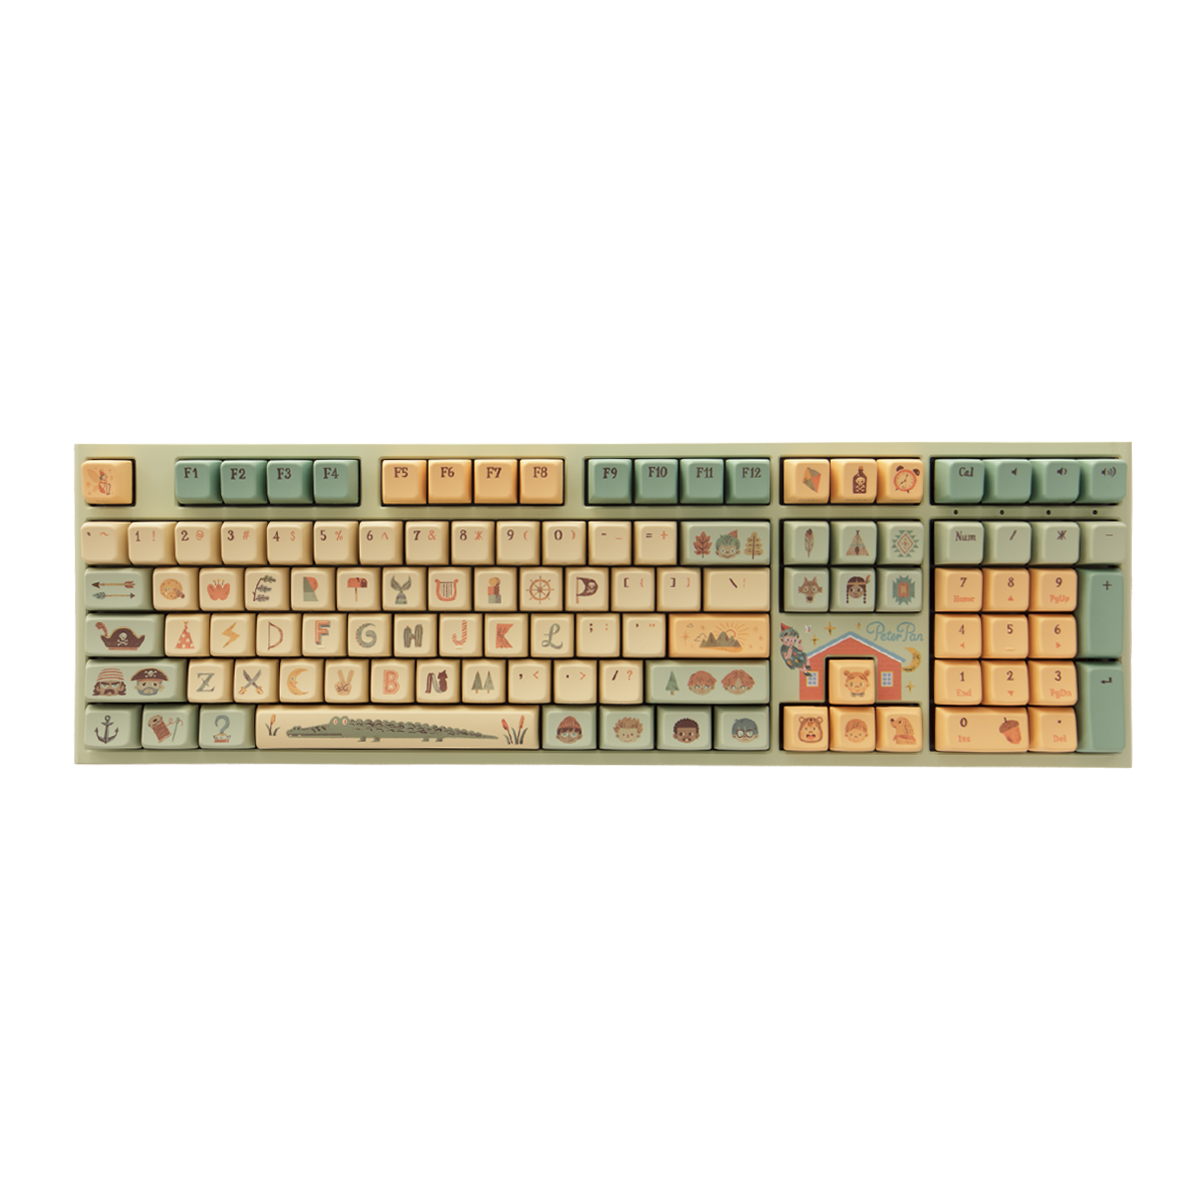 Ducky - Ducky One 2 Pro Peter Pan Dimanche Collaboration Limited Edition Mechanical Gaming Keyboard - US Layout